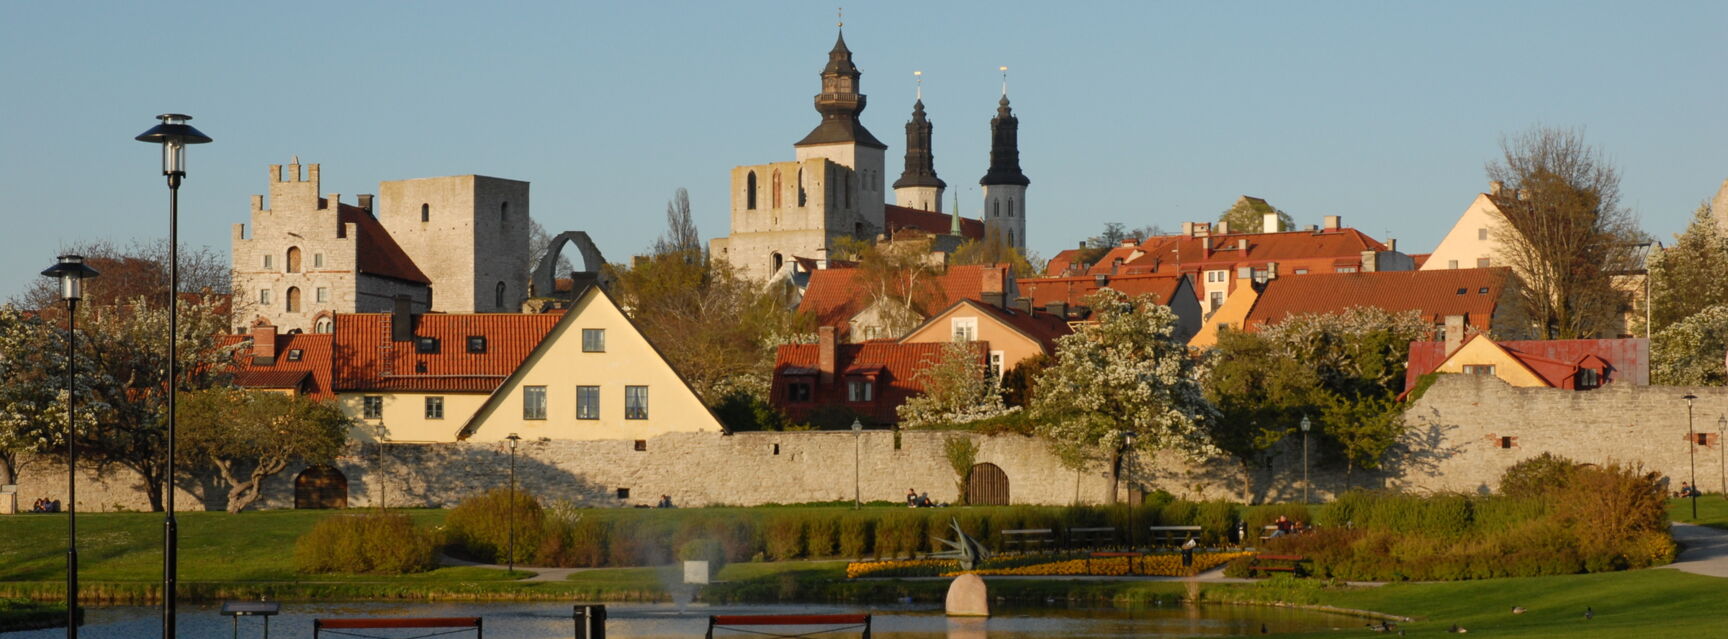 Main picture Visby © Region Gotland